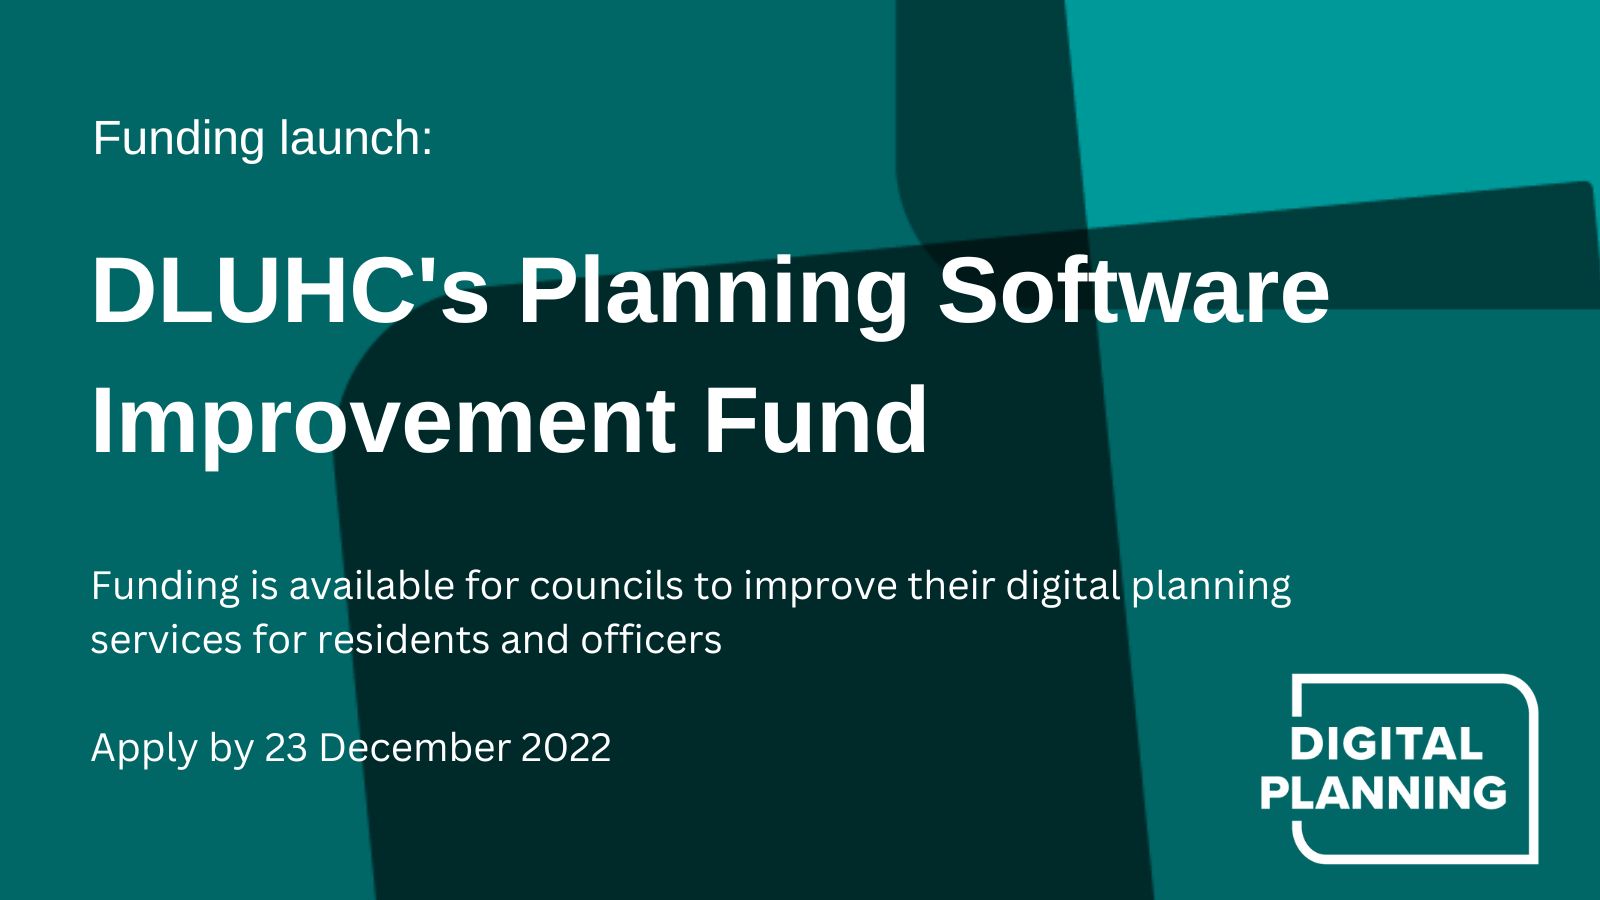 Funding launch: DLUHC's Planning Software Improvement Fund. Funding is available for councils to improve their digital planning services for residents and officers Apply by 23 December 2022